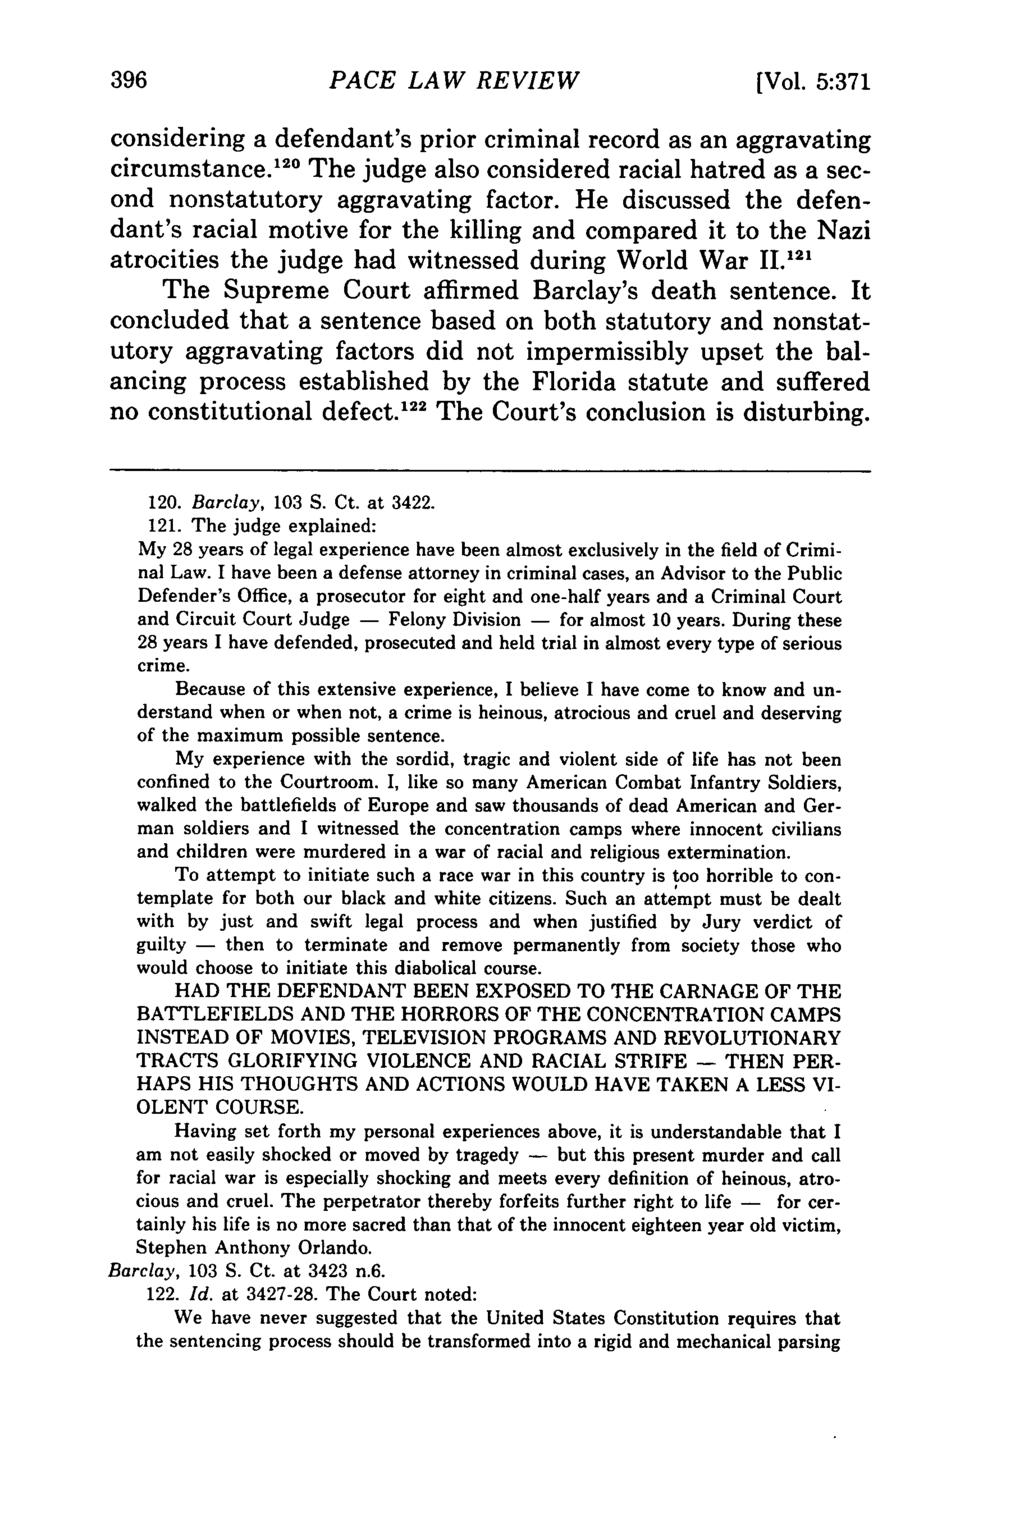 PACE LAW REVIEW [Vol. 5:371 considering a defendant's prior criminal record as an aggravating circumstance. 120 The judge also considered racial hatred as a second nonstatutory aggravating factor.